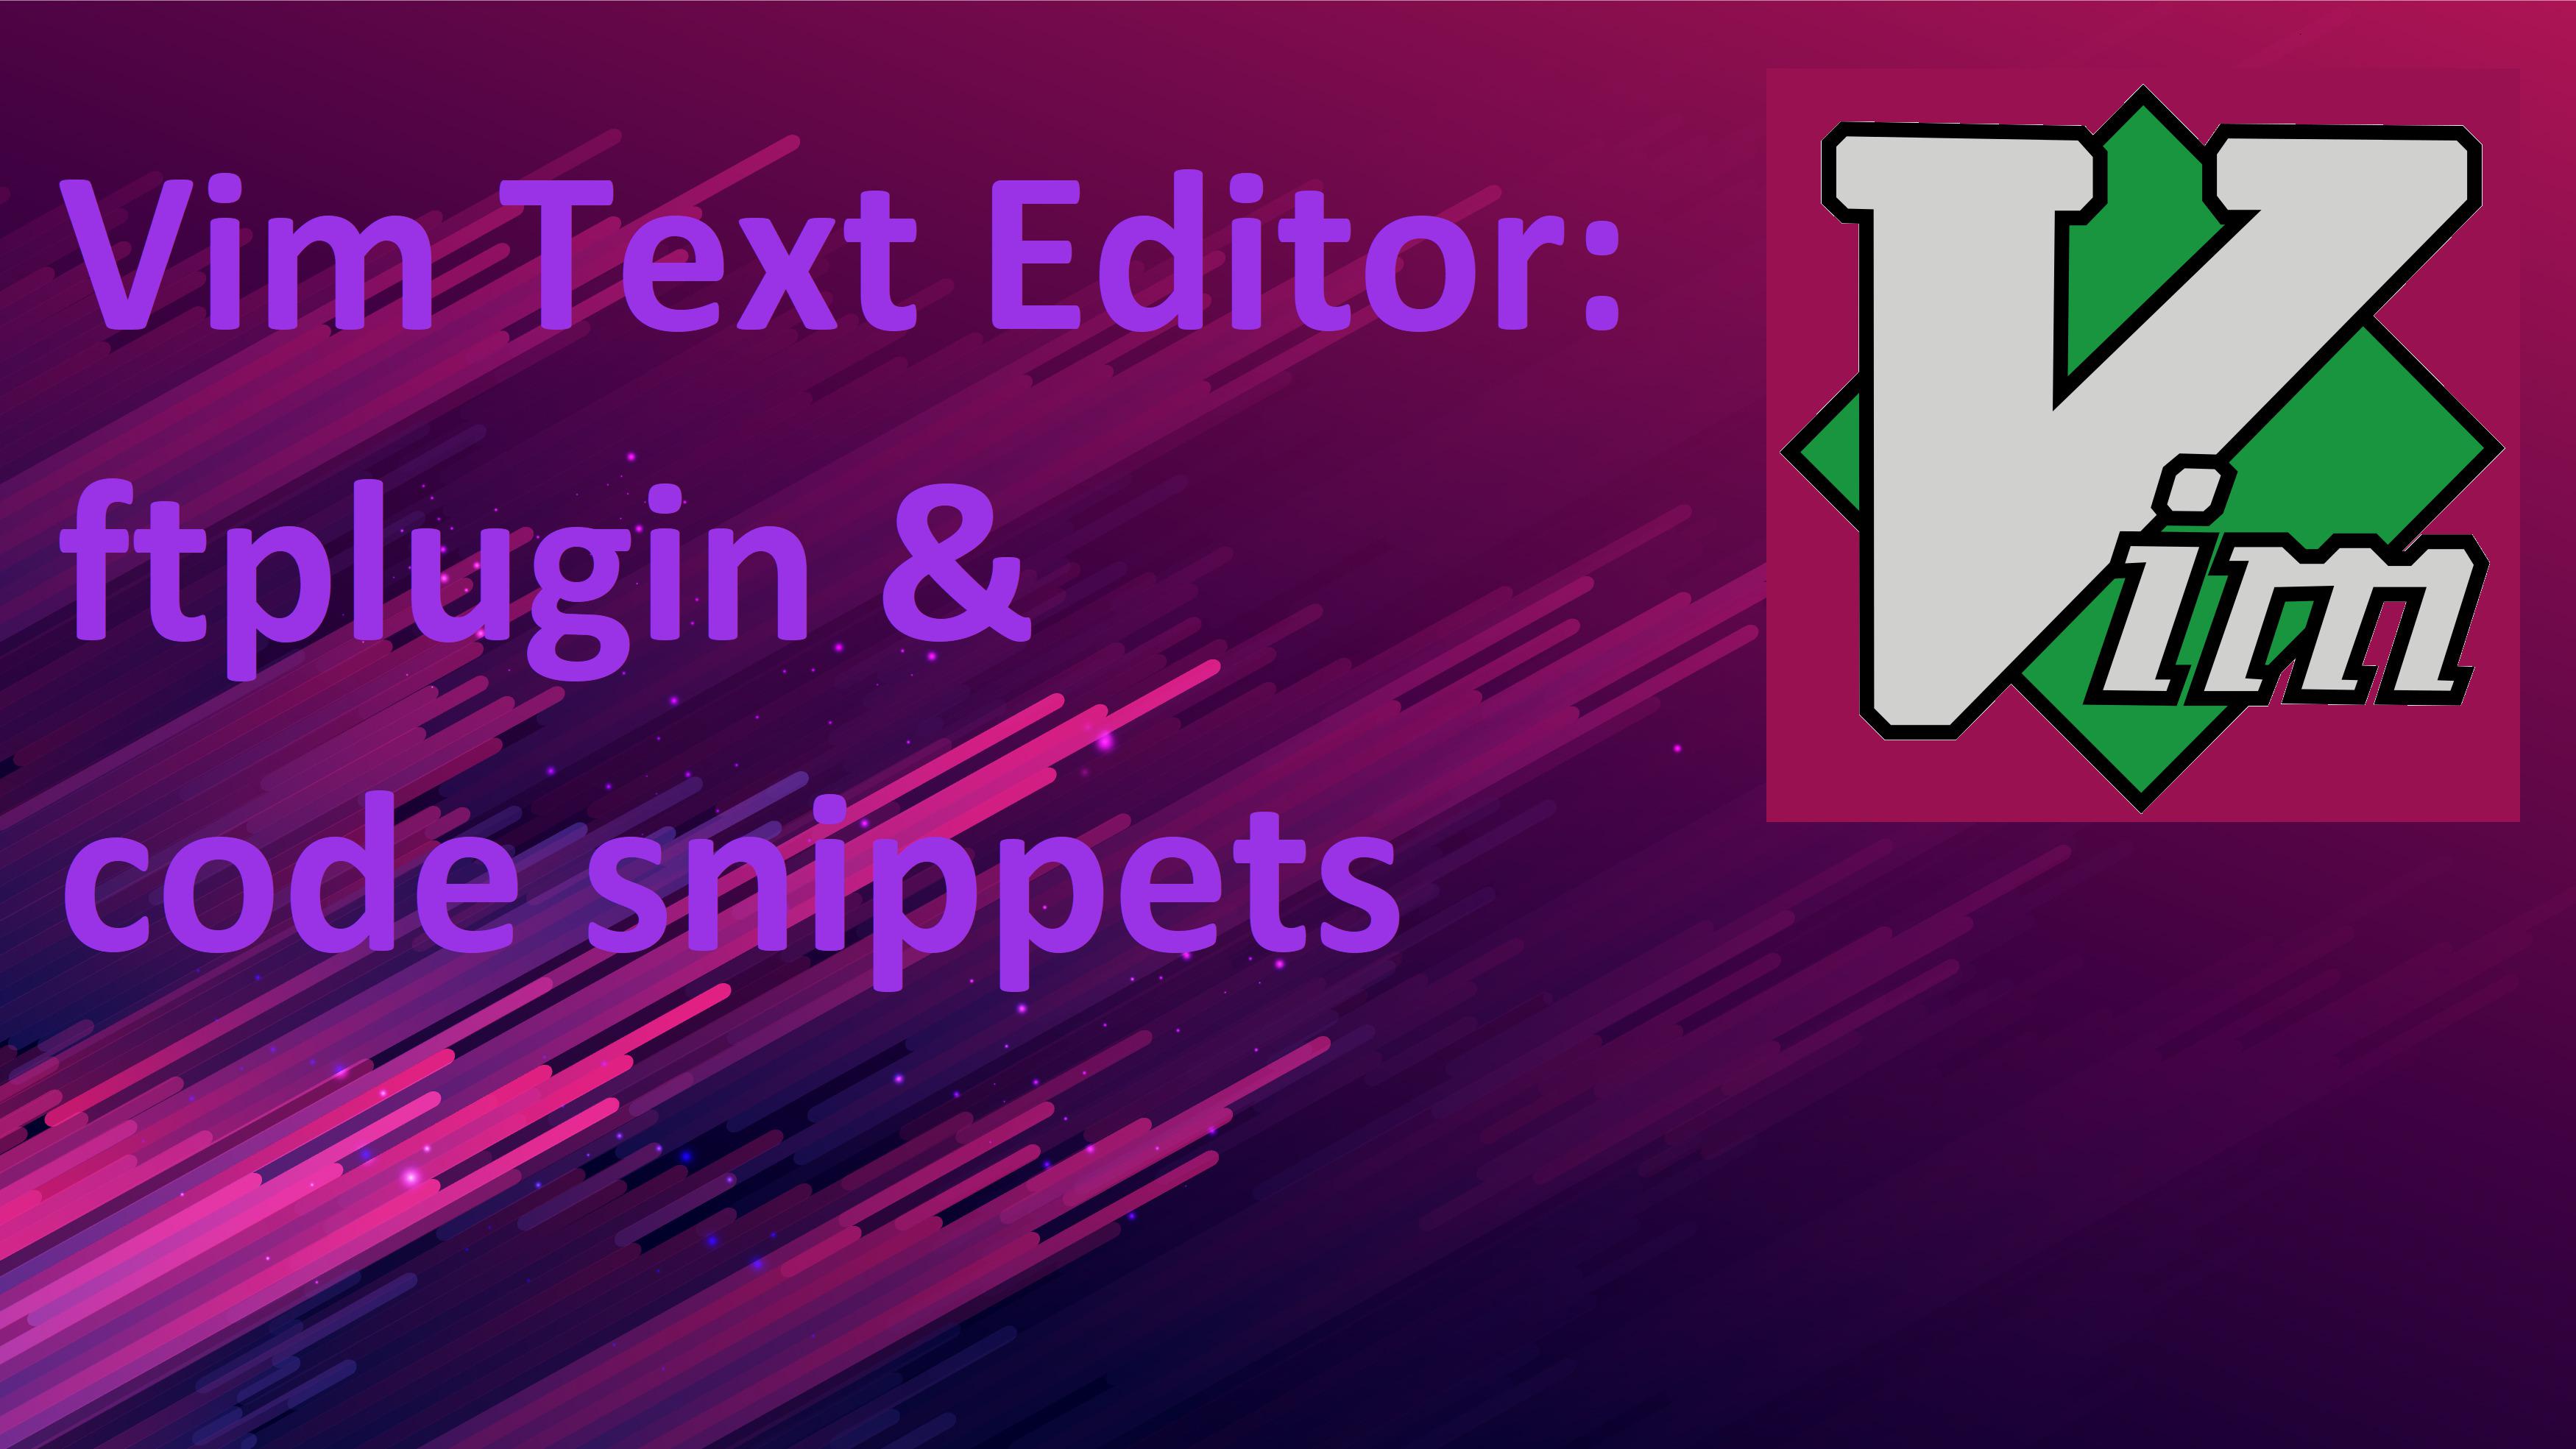 Banner of Banner of vim text editor : ftplugin and code snippets